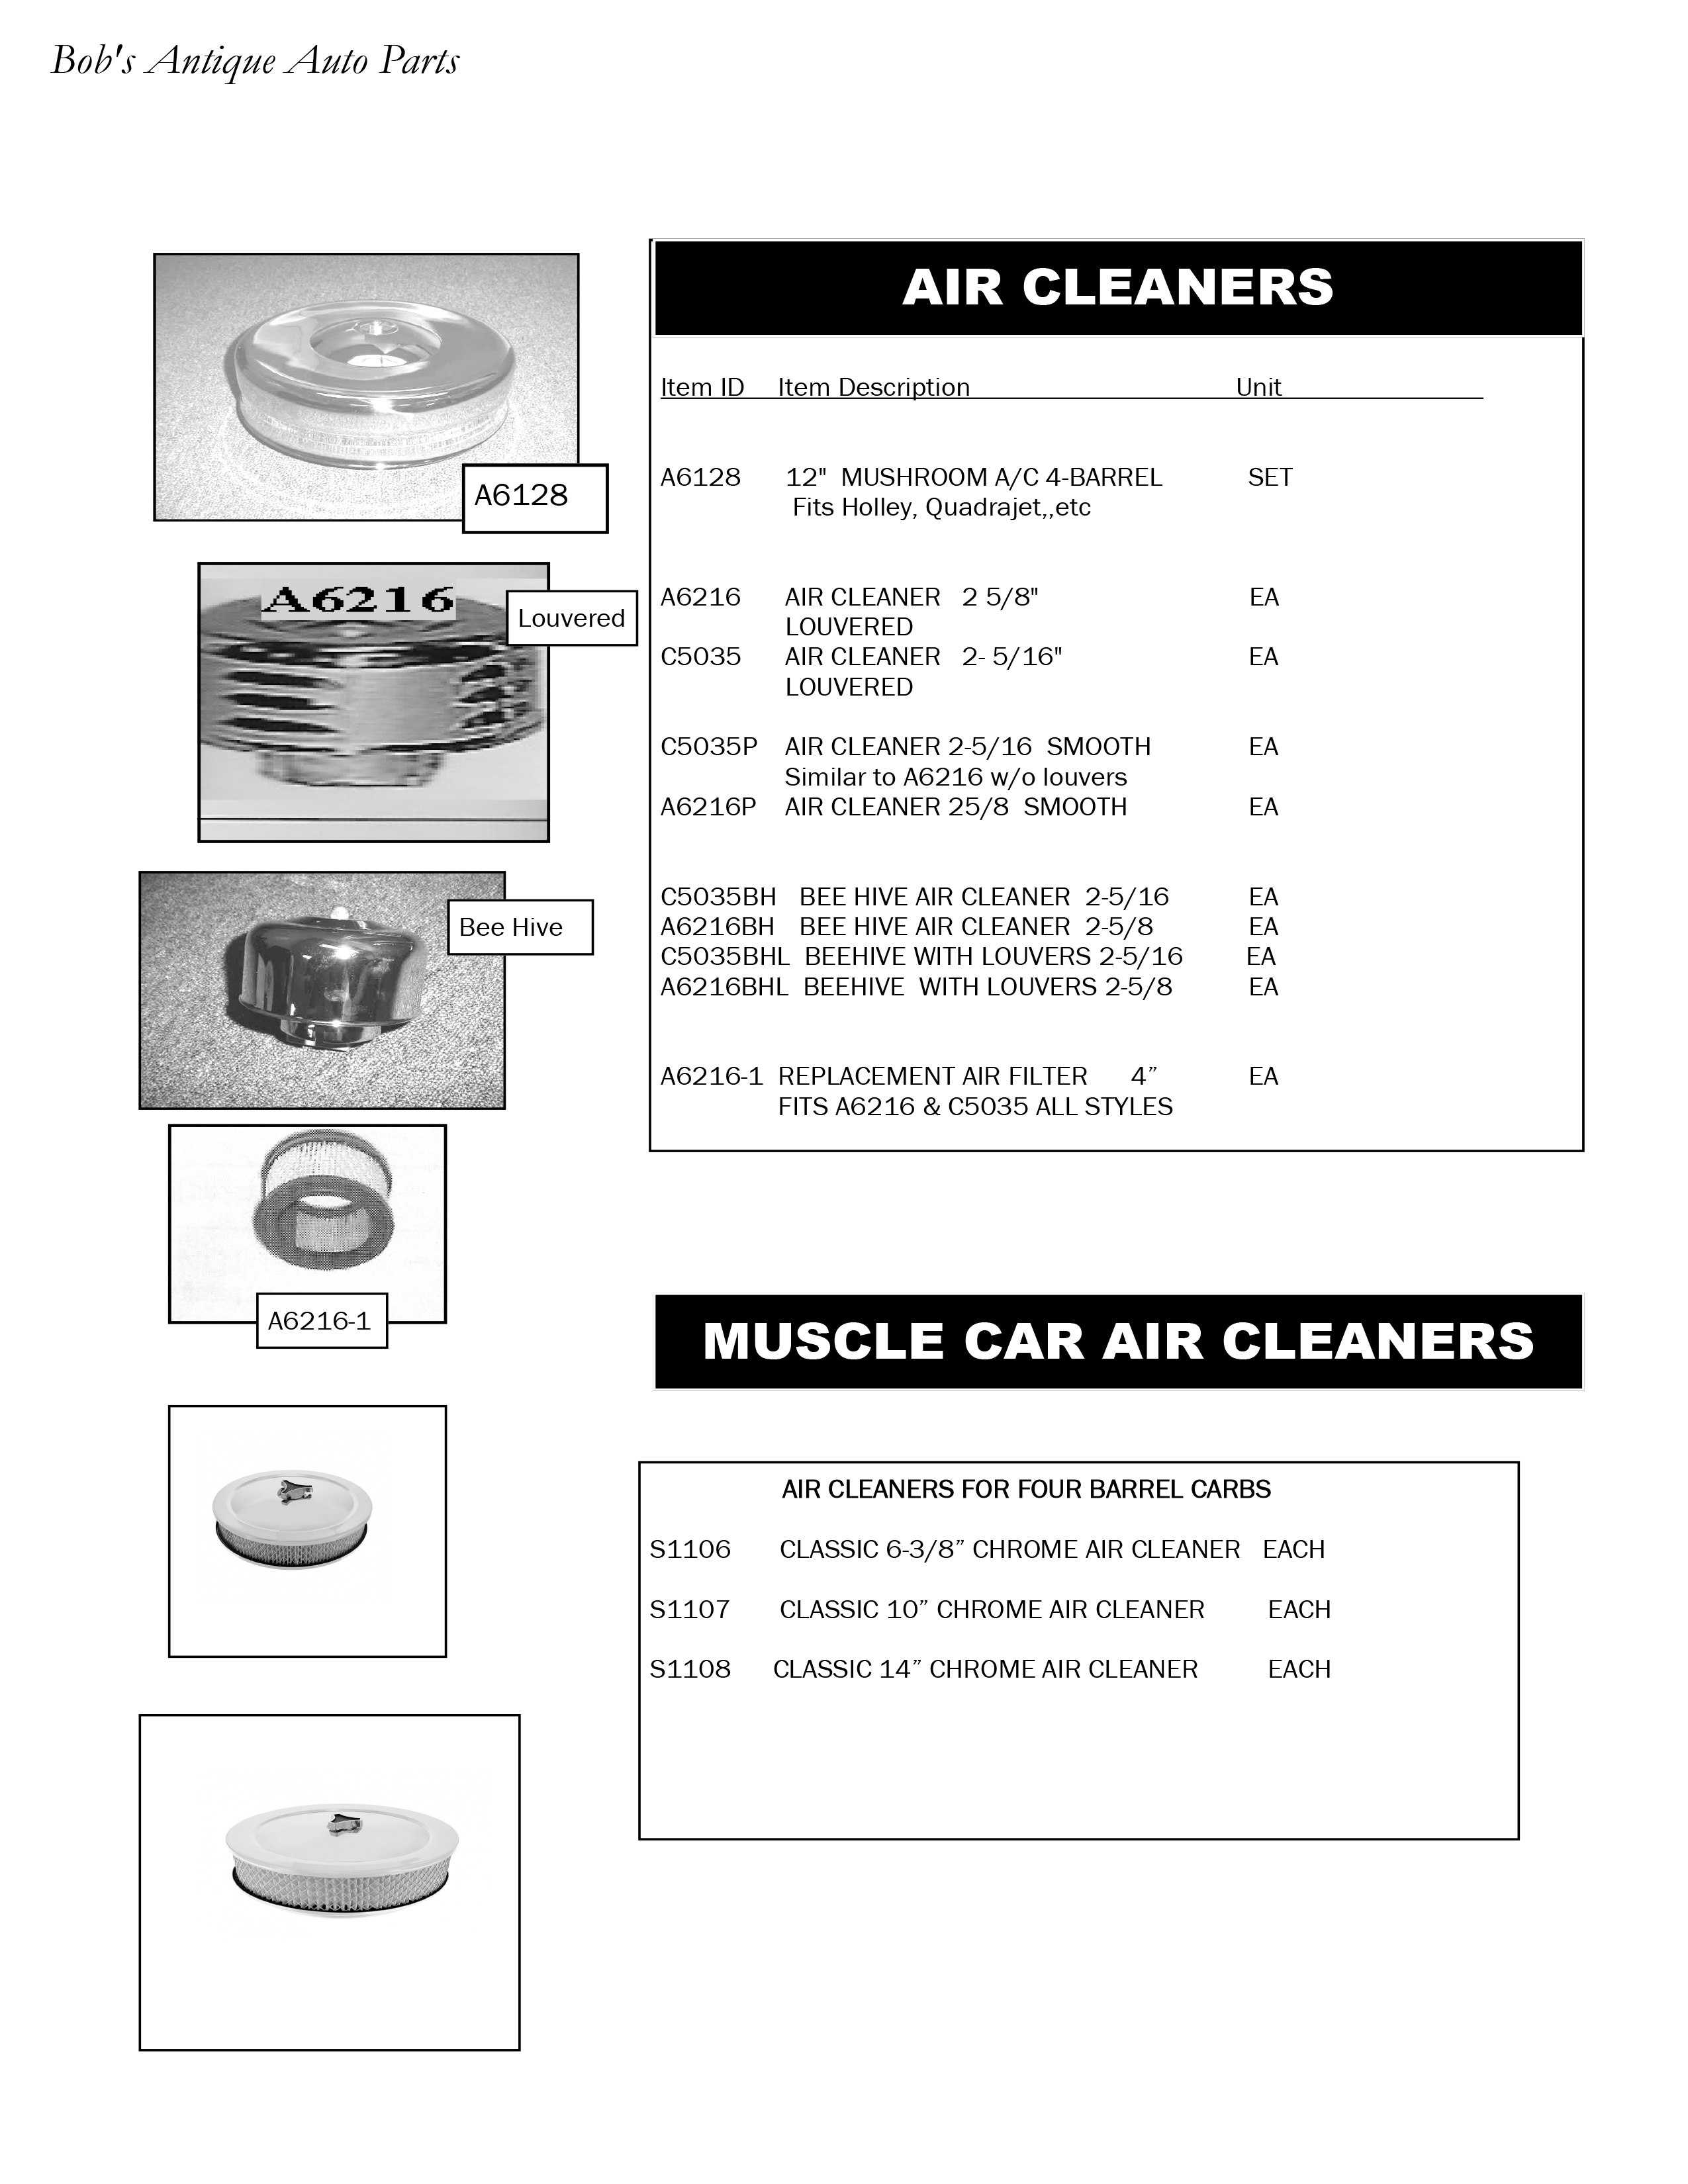 Chevrolet Air Cleaners 2019